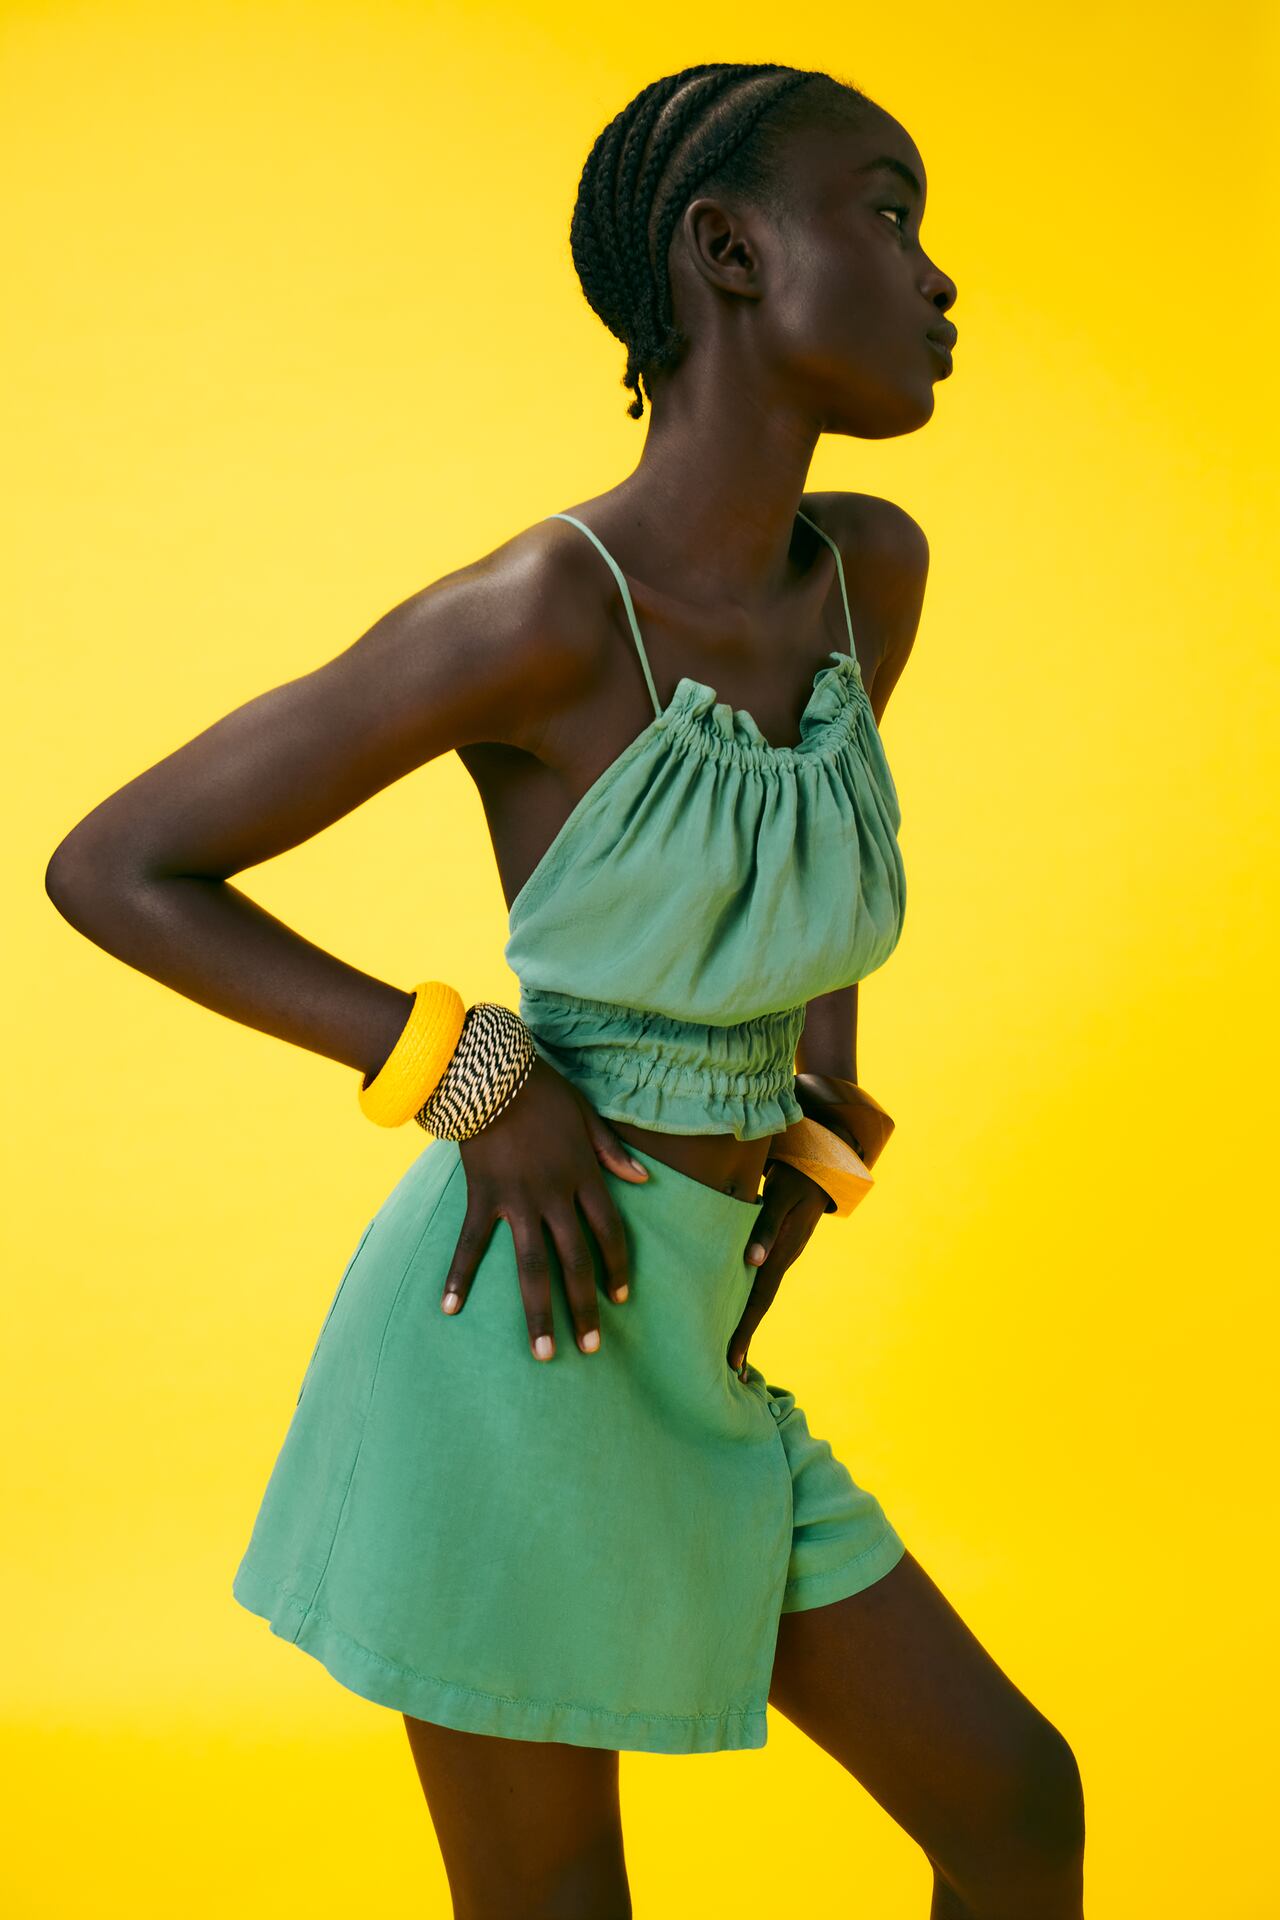 Black woman wearing green strappy top and skirt against yellow background